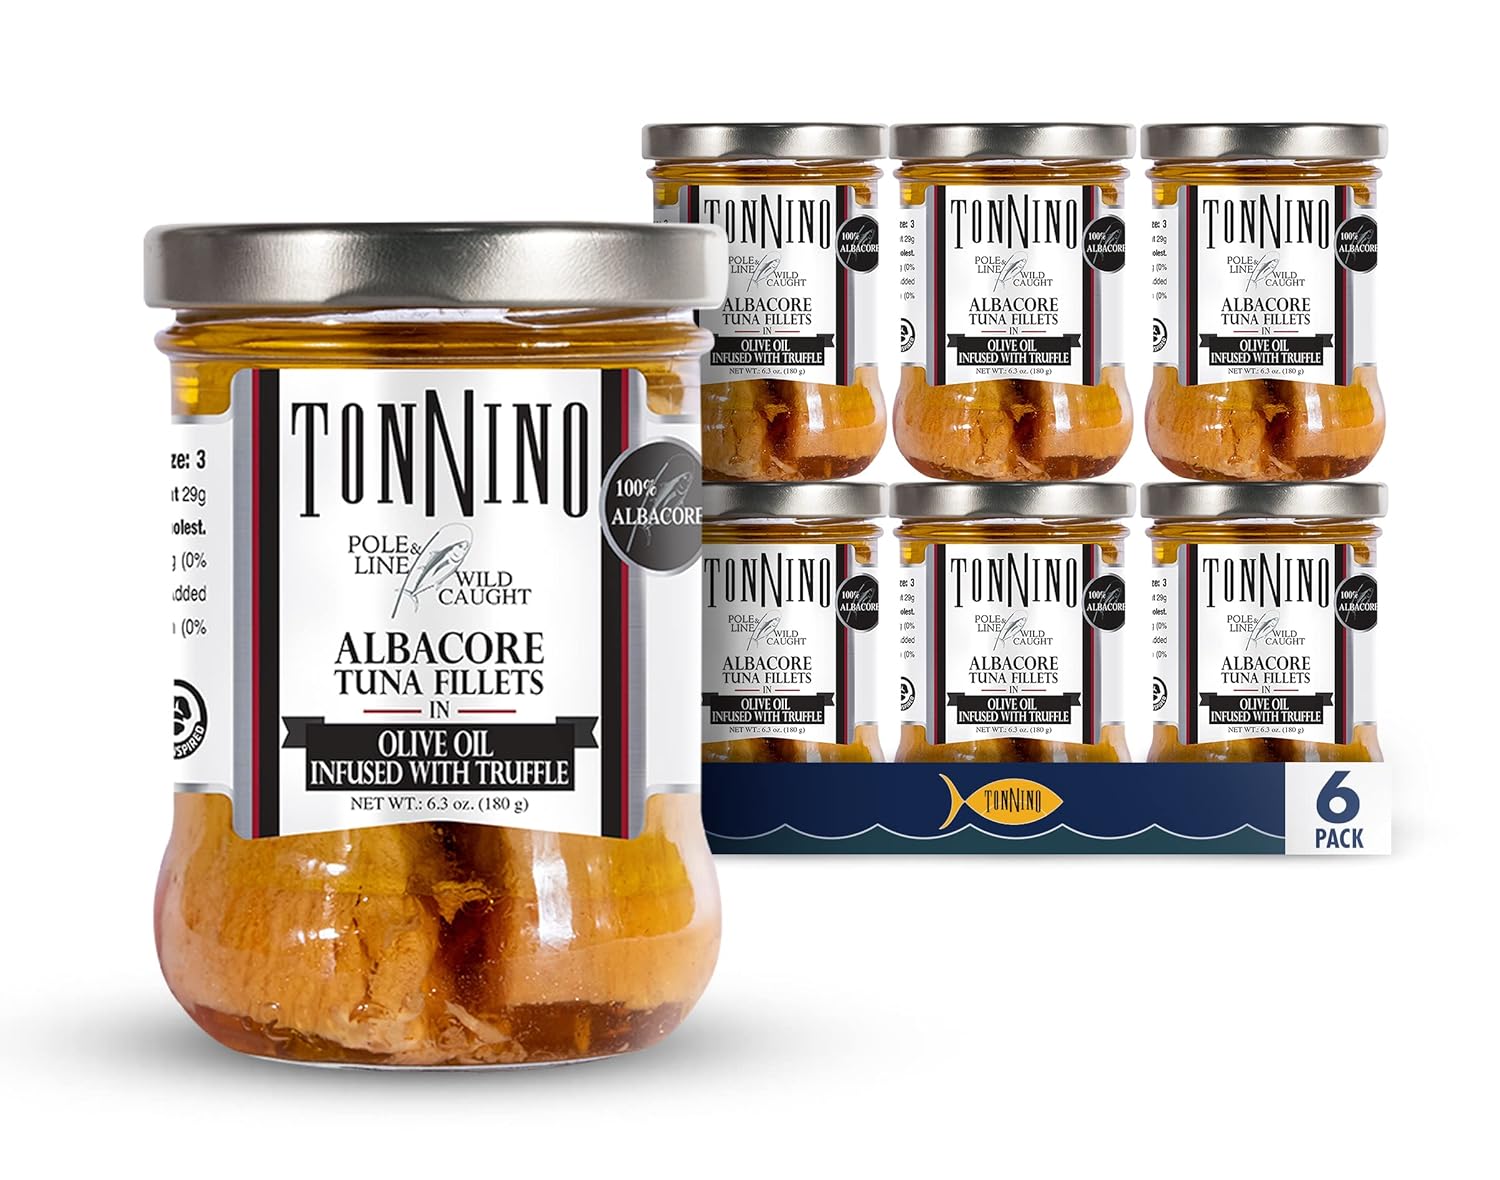 Tonnino Albacore Tuna in olive oil in Truffle 6.3oz - 6-Pack: Omega-3 Rich, High Protein, Gluten-Free, Ready-to-Eat Tuna Packets for Tuna Salad, Tuna Fish Alternative to Salmon, Pole & Line Caught : Grocery & Gourmet Food